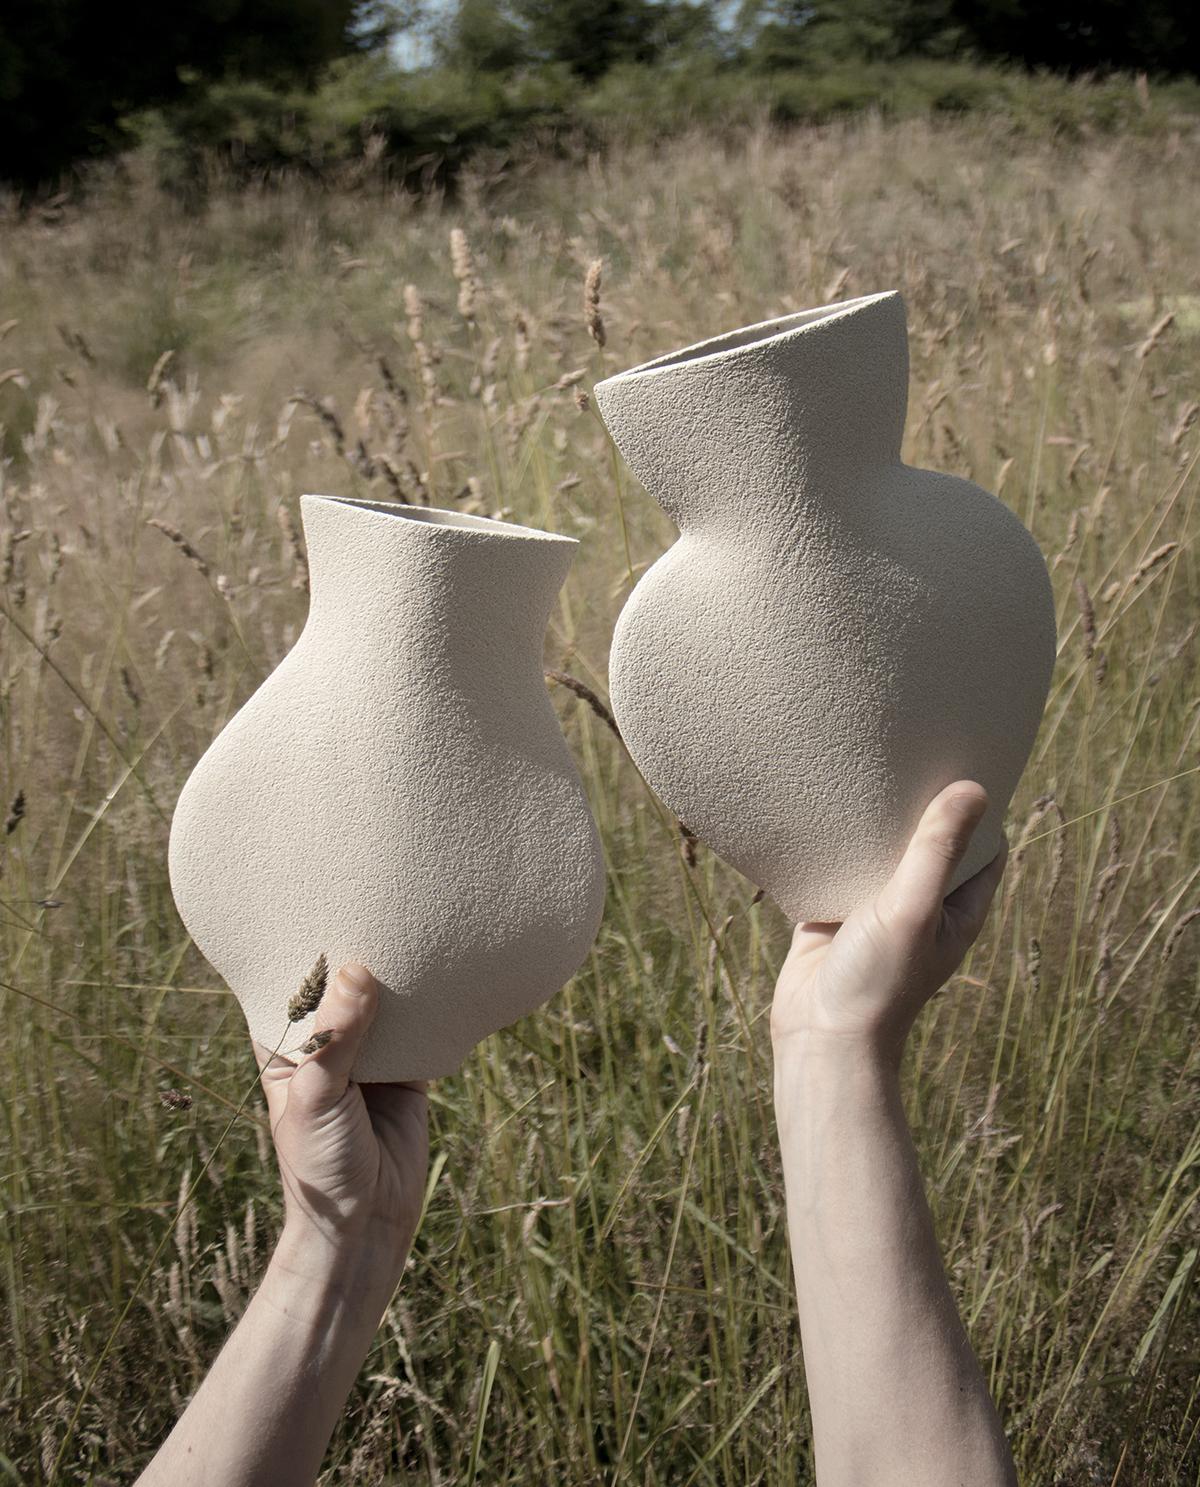 Contemporary 21st Century Amphora Vase in White Ceramic, Hand-Crafted in France For Sale